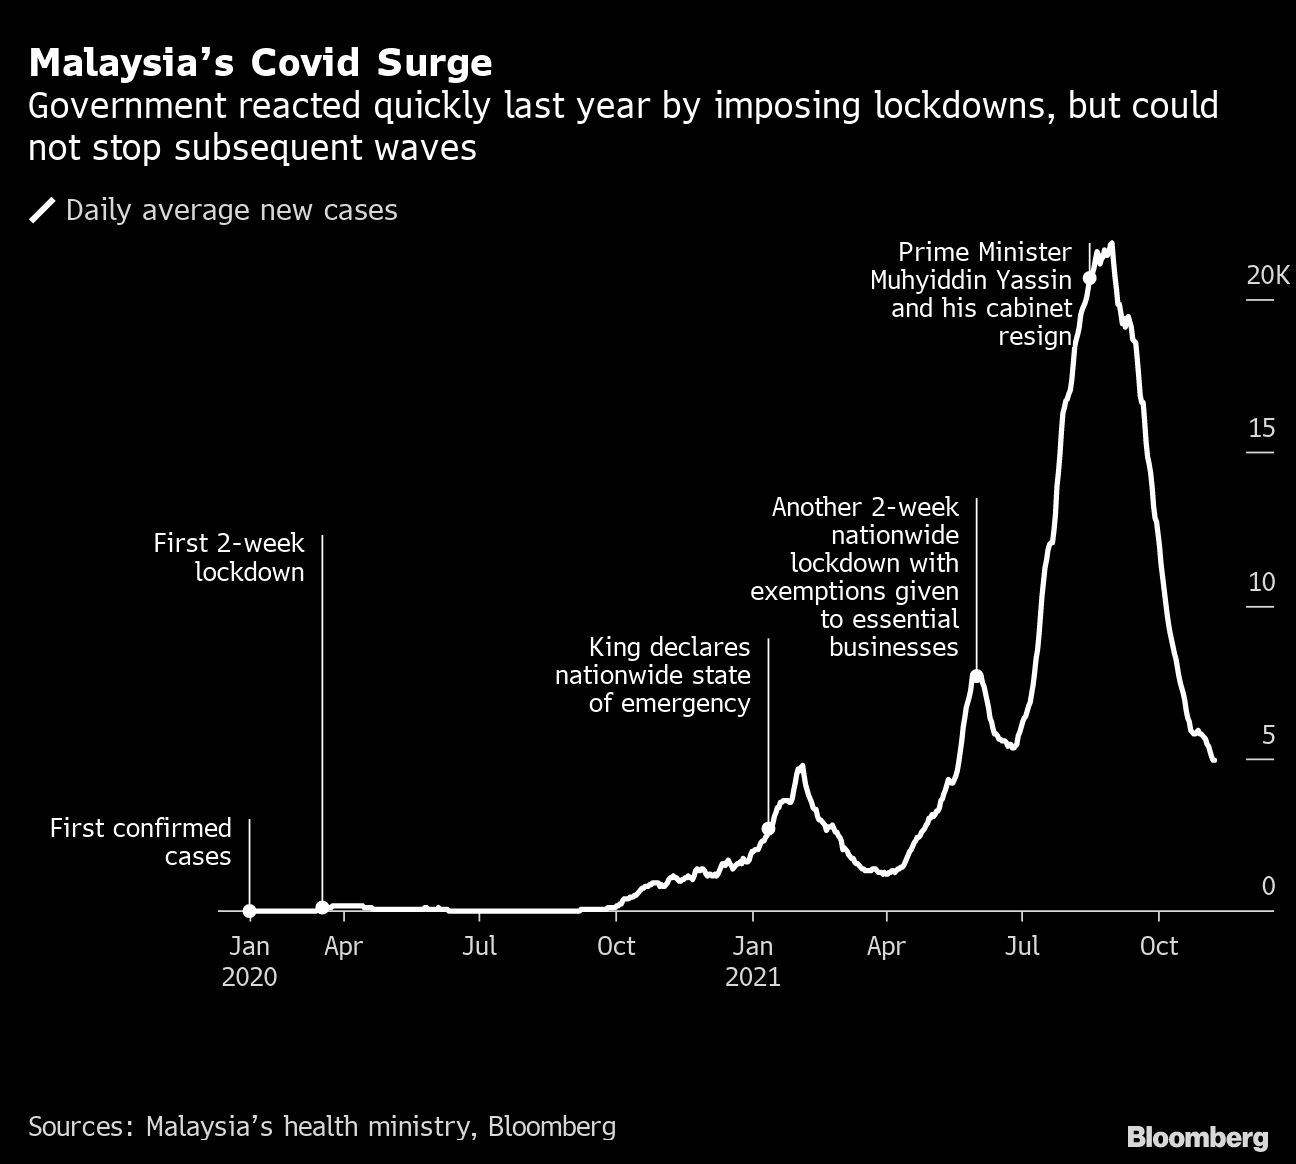 Malaysia’s Covid infections